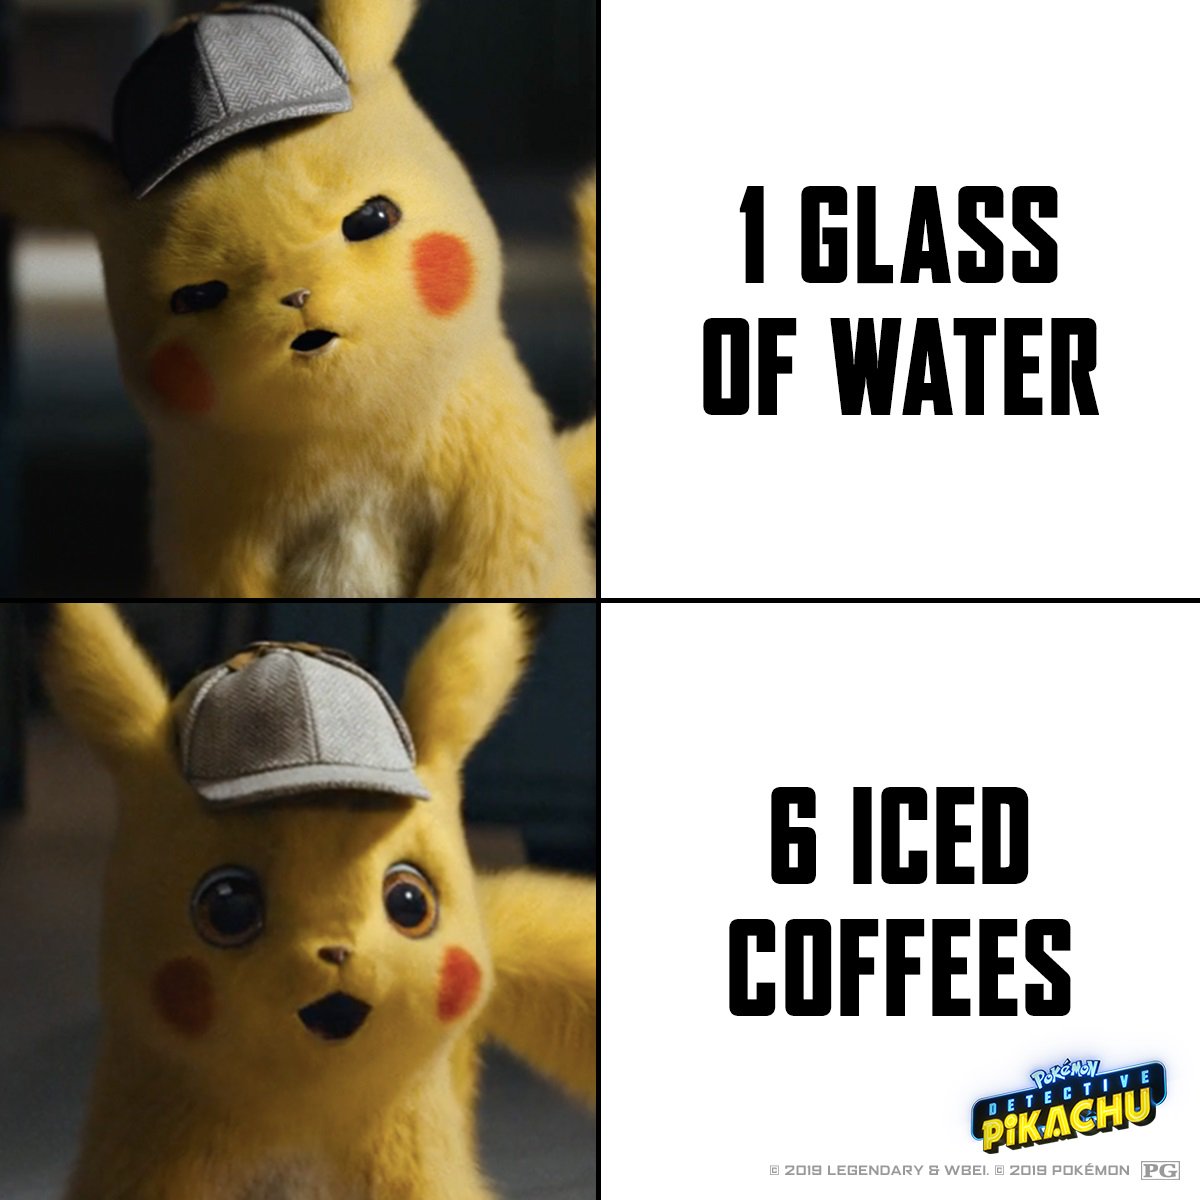 POKÉMON Detective Pikachu's A World Class Detective Without Coffee? Let's Celebrate This #NationalCoffeeDay Right!